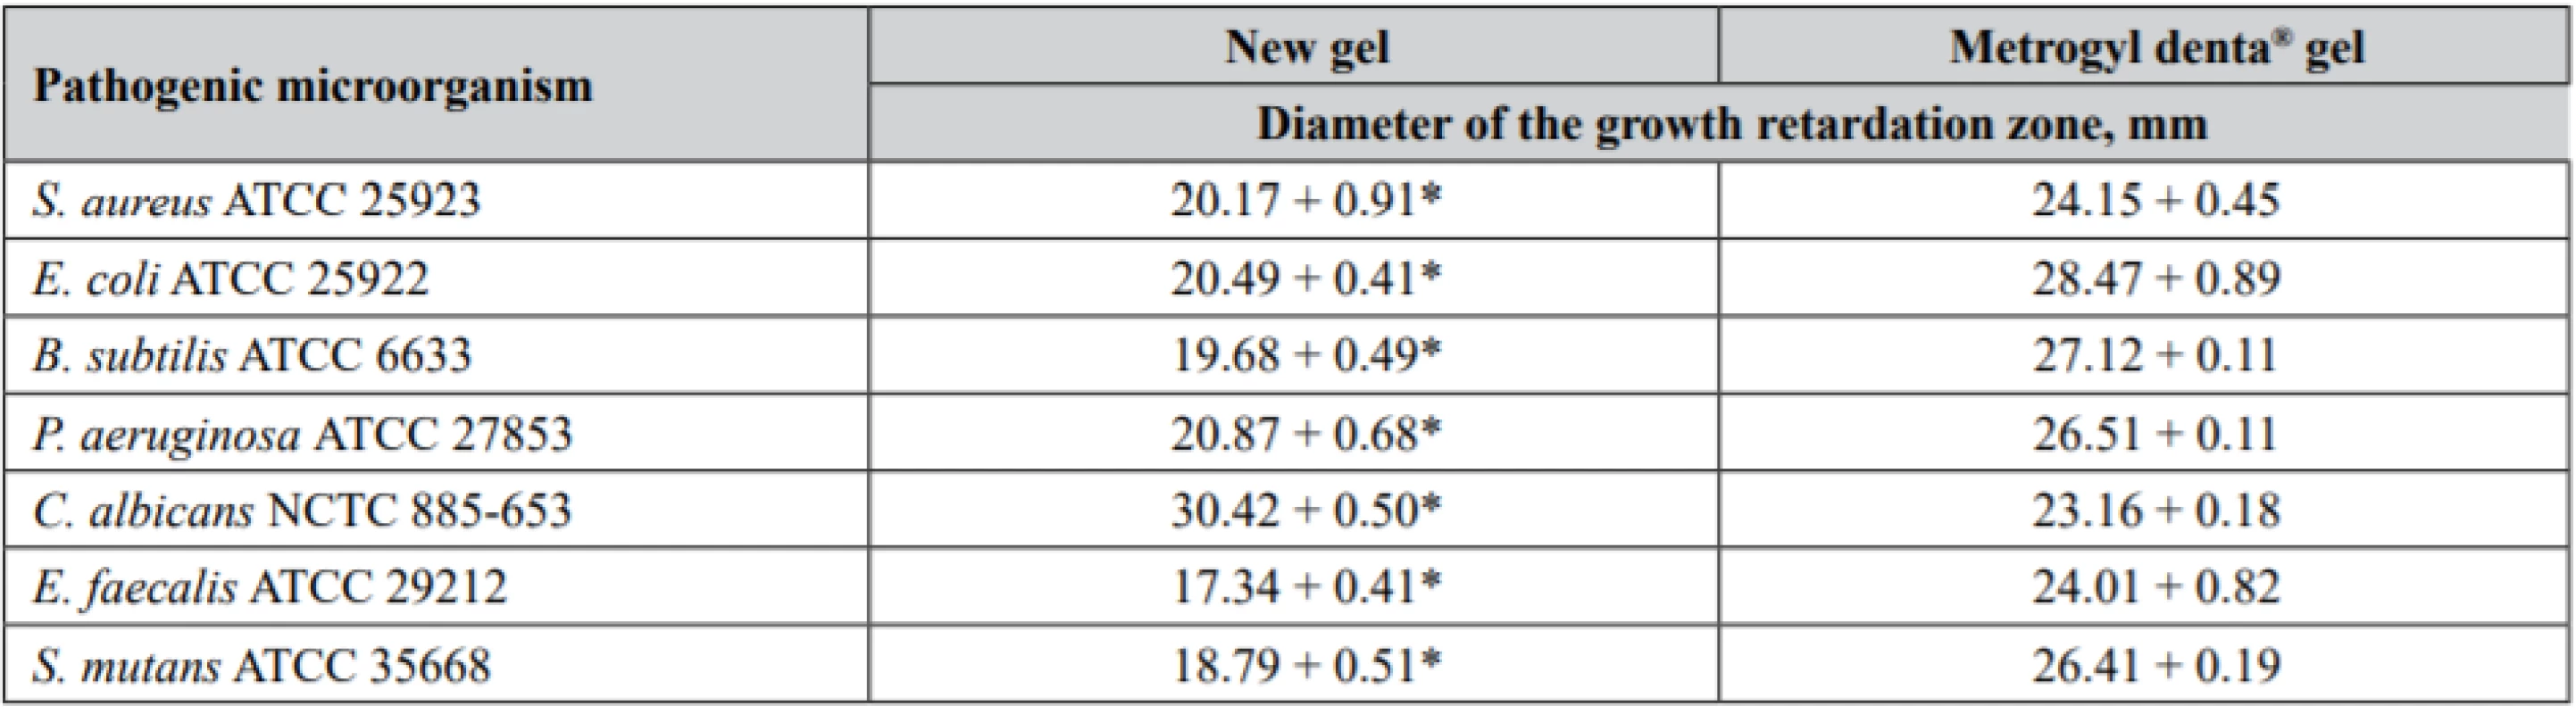  Investigation of the antimicrobial activity of the new gel by the method of diffusion into agar gel